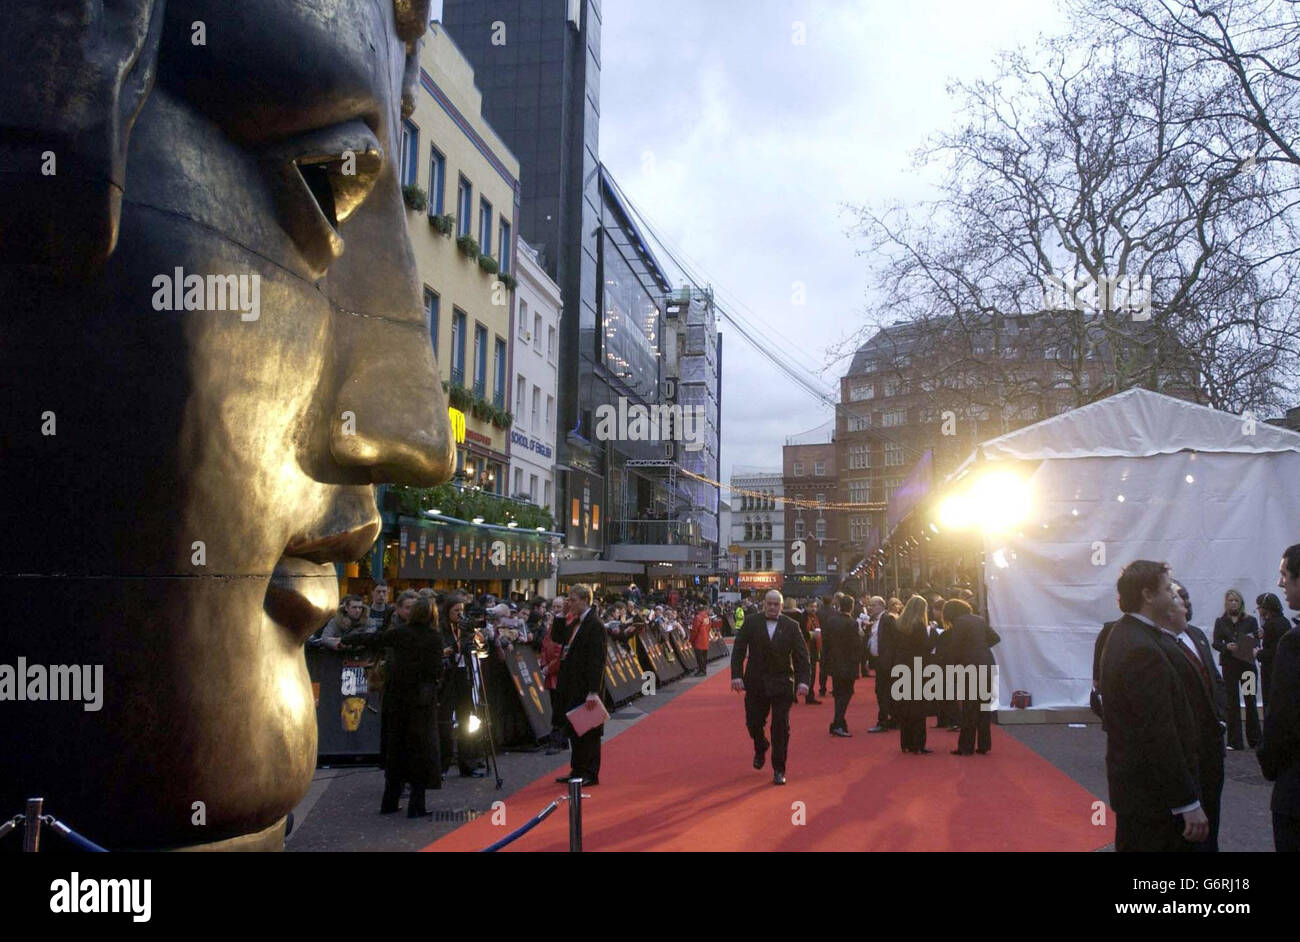 Crowds and press gather outside the Odeon Leicester Square in London ahead of the Orange British Academy Film Awards. Stock Photo